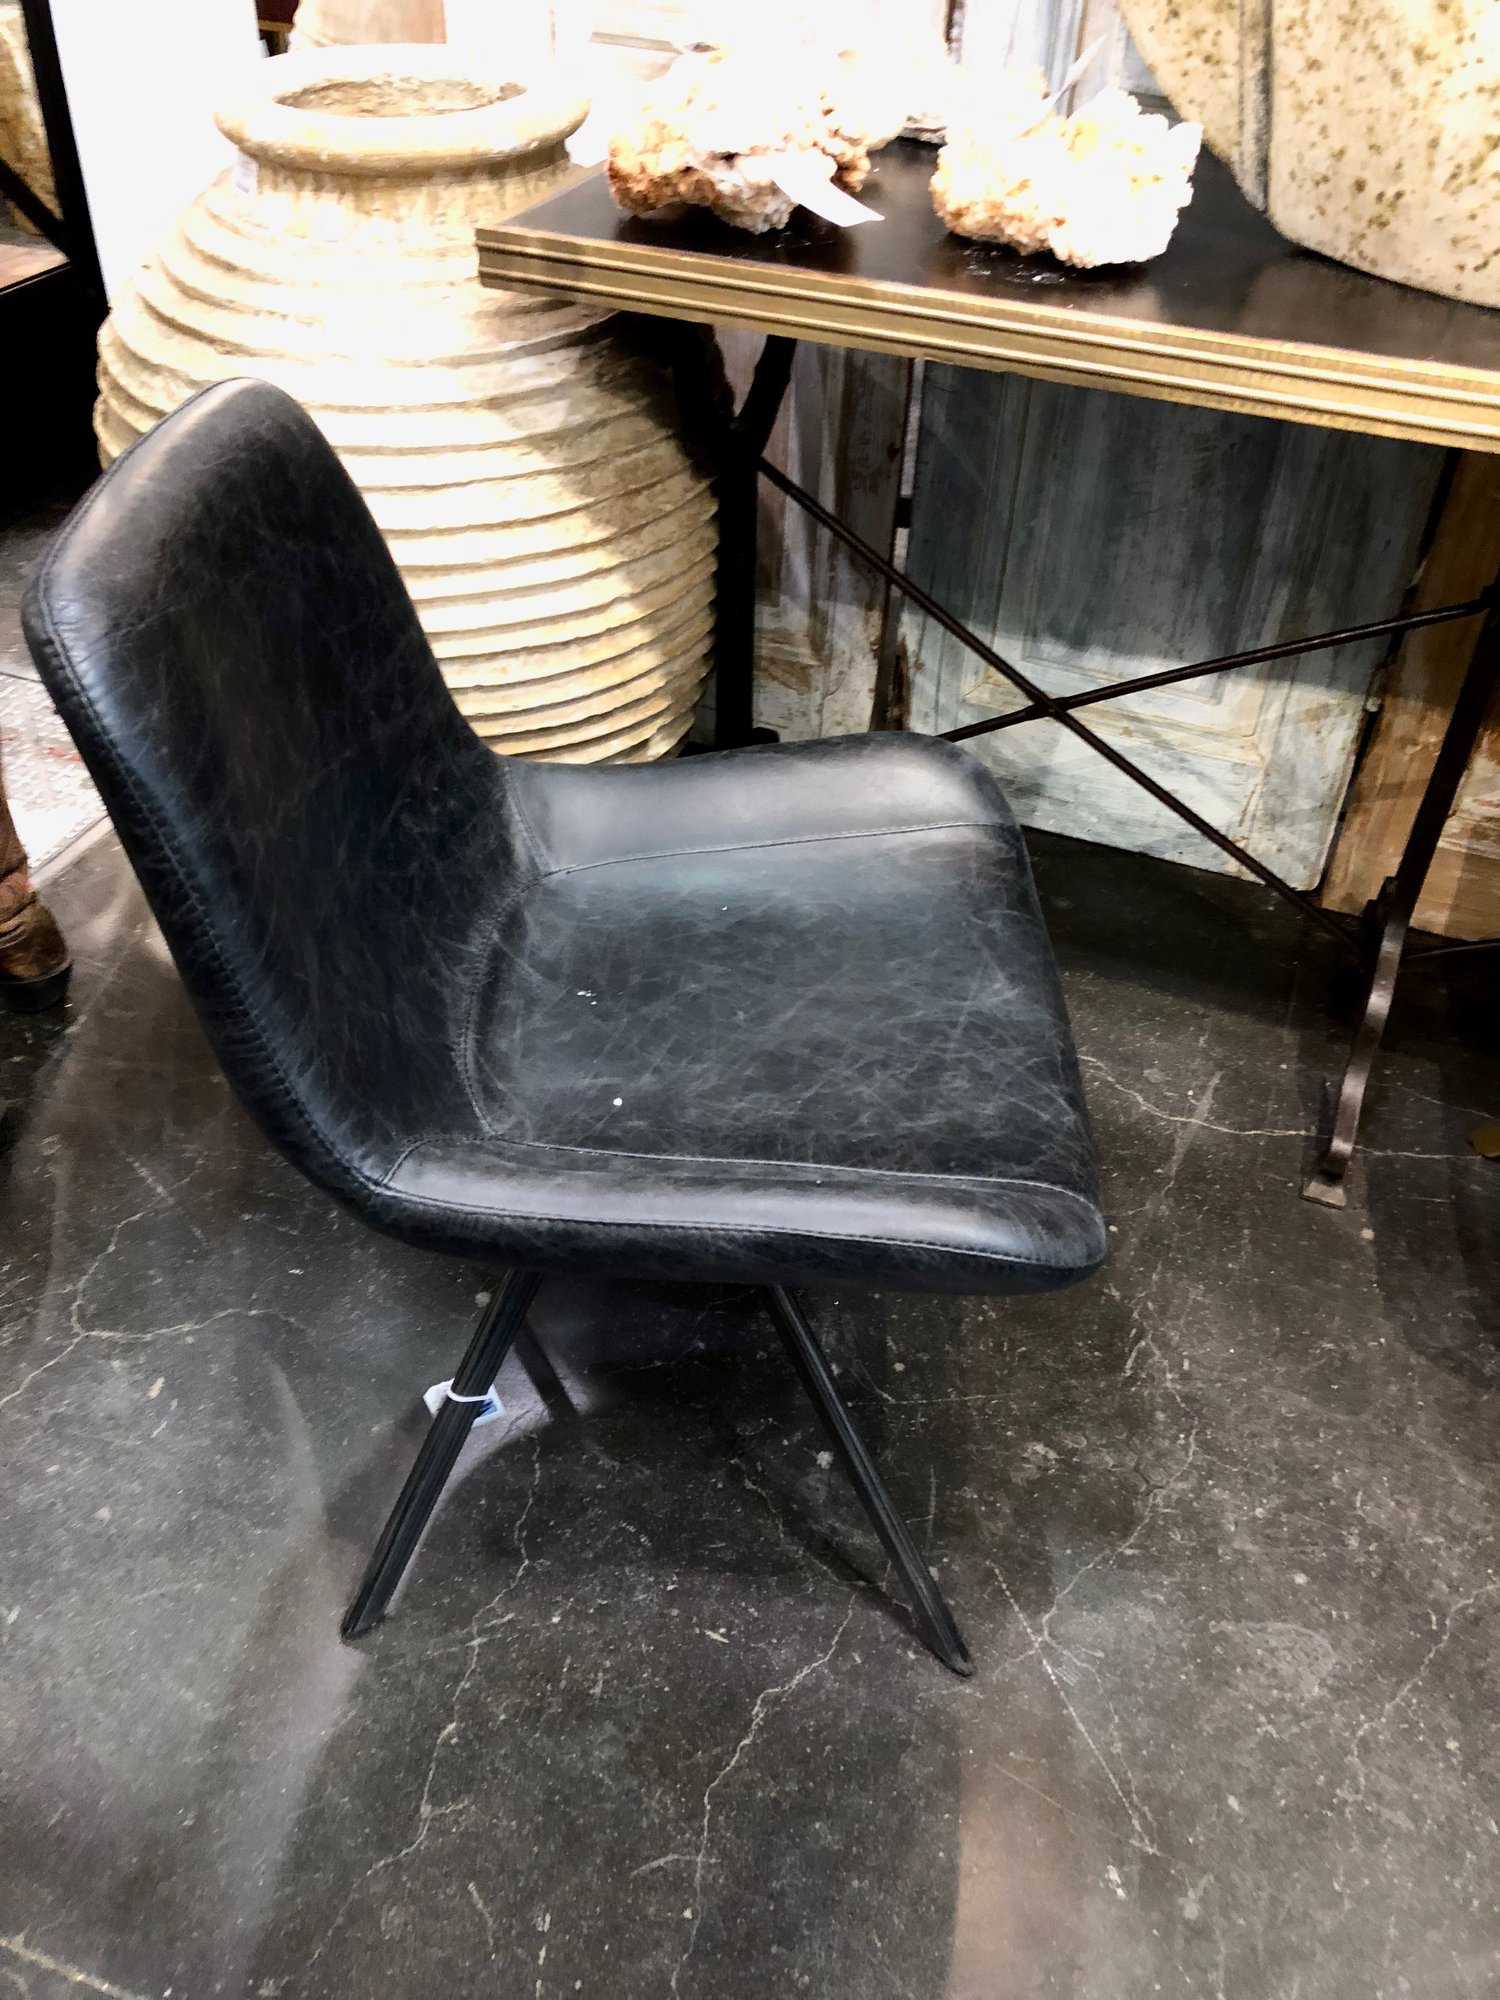 LOVE this leather chair for dining or desk seating.  Very comfortable!